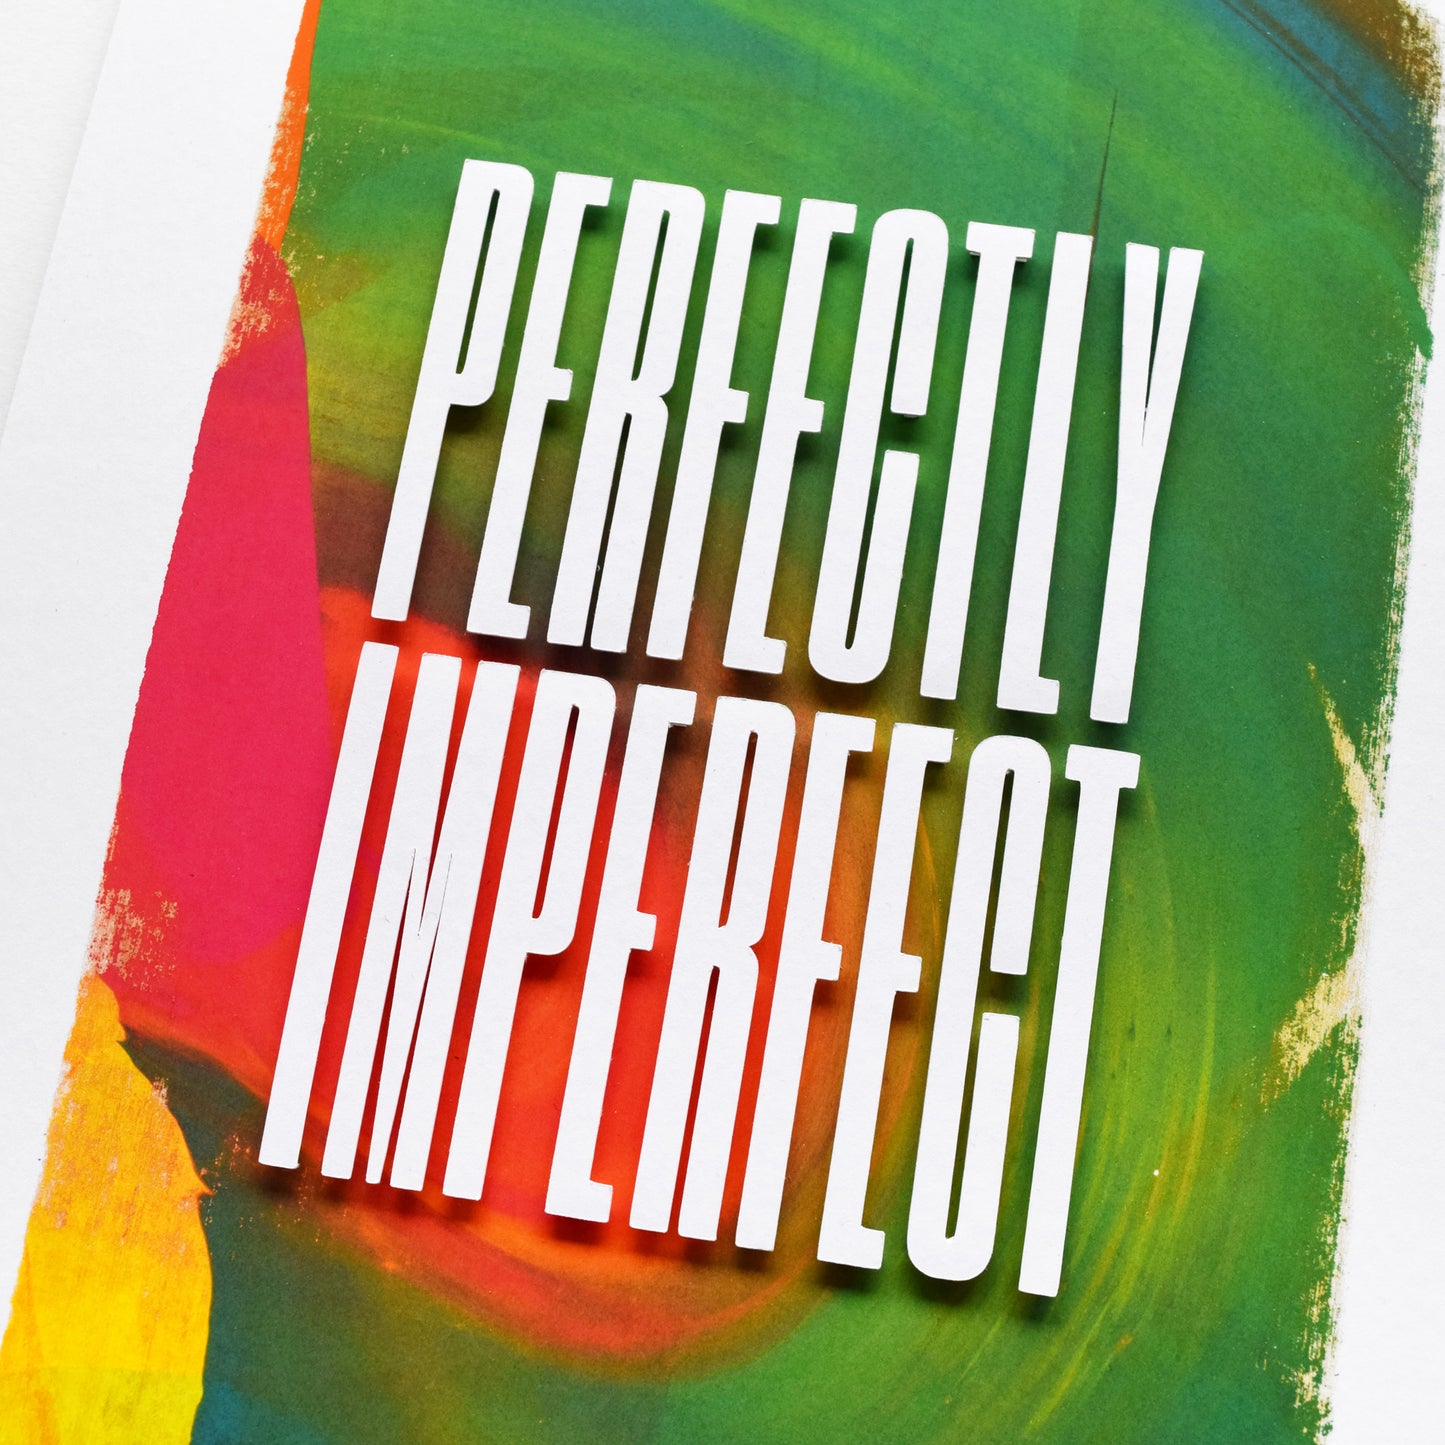 Like No Other — 'Perfectly Imperfect' Framed Original Artwork